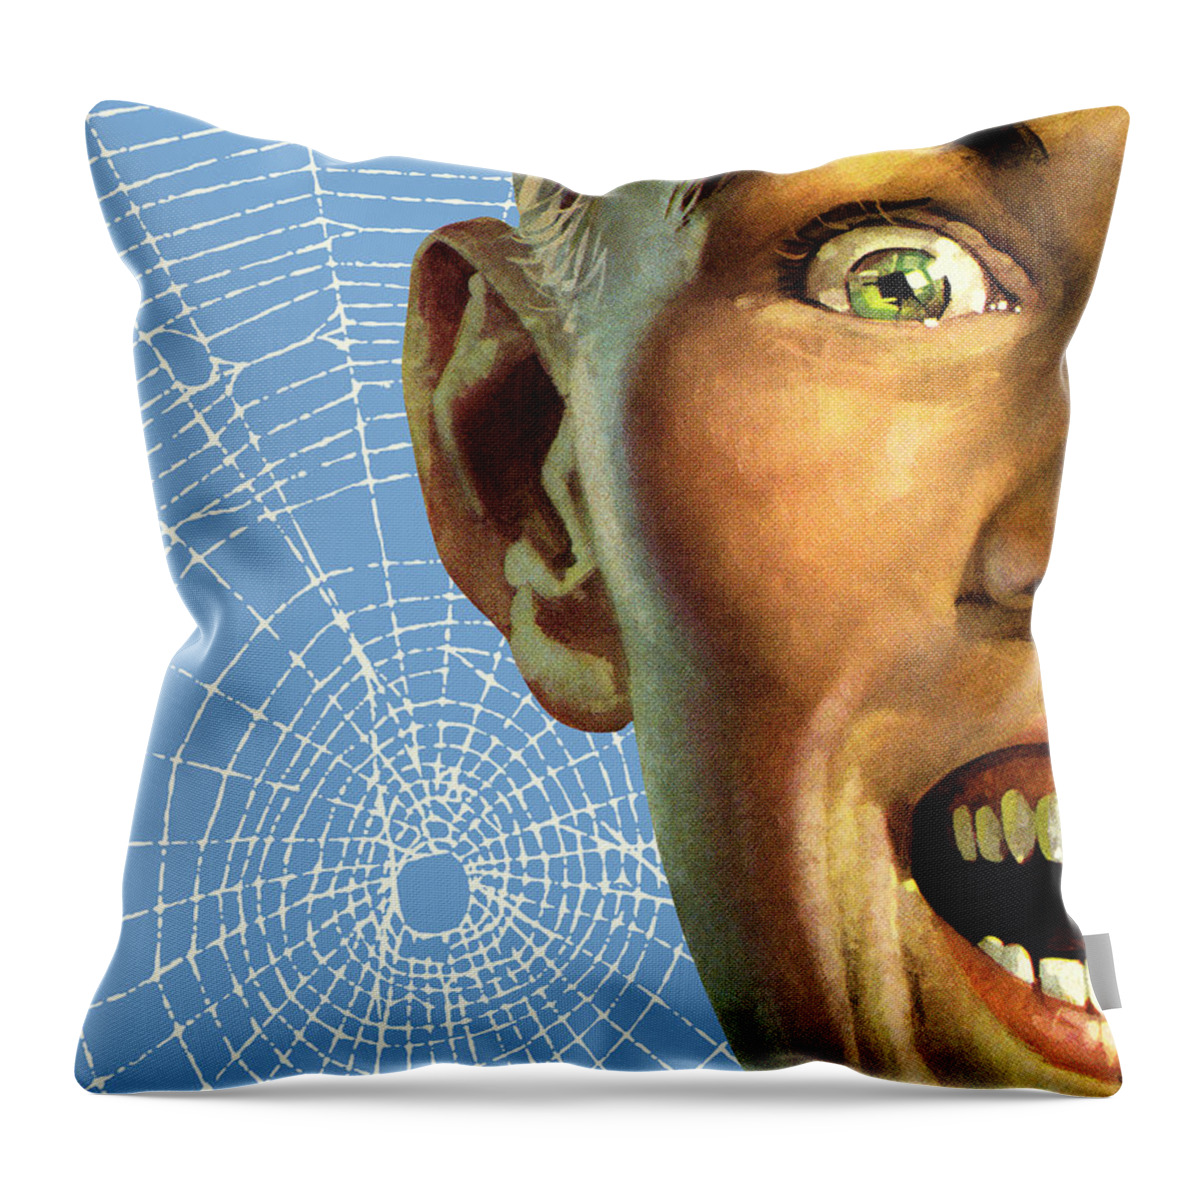 Adult Throw Pillow featuring the drawing Closeup of a Face and Spiderweb by CSA Images